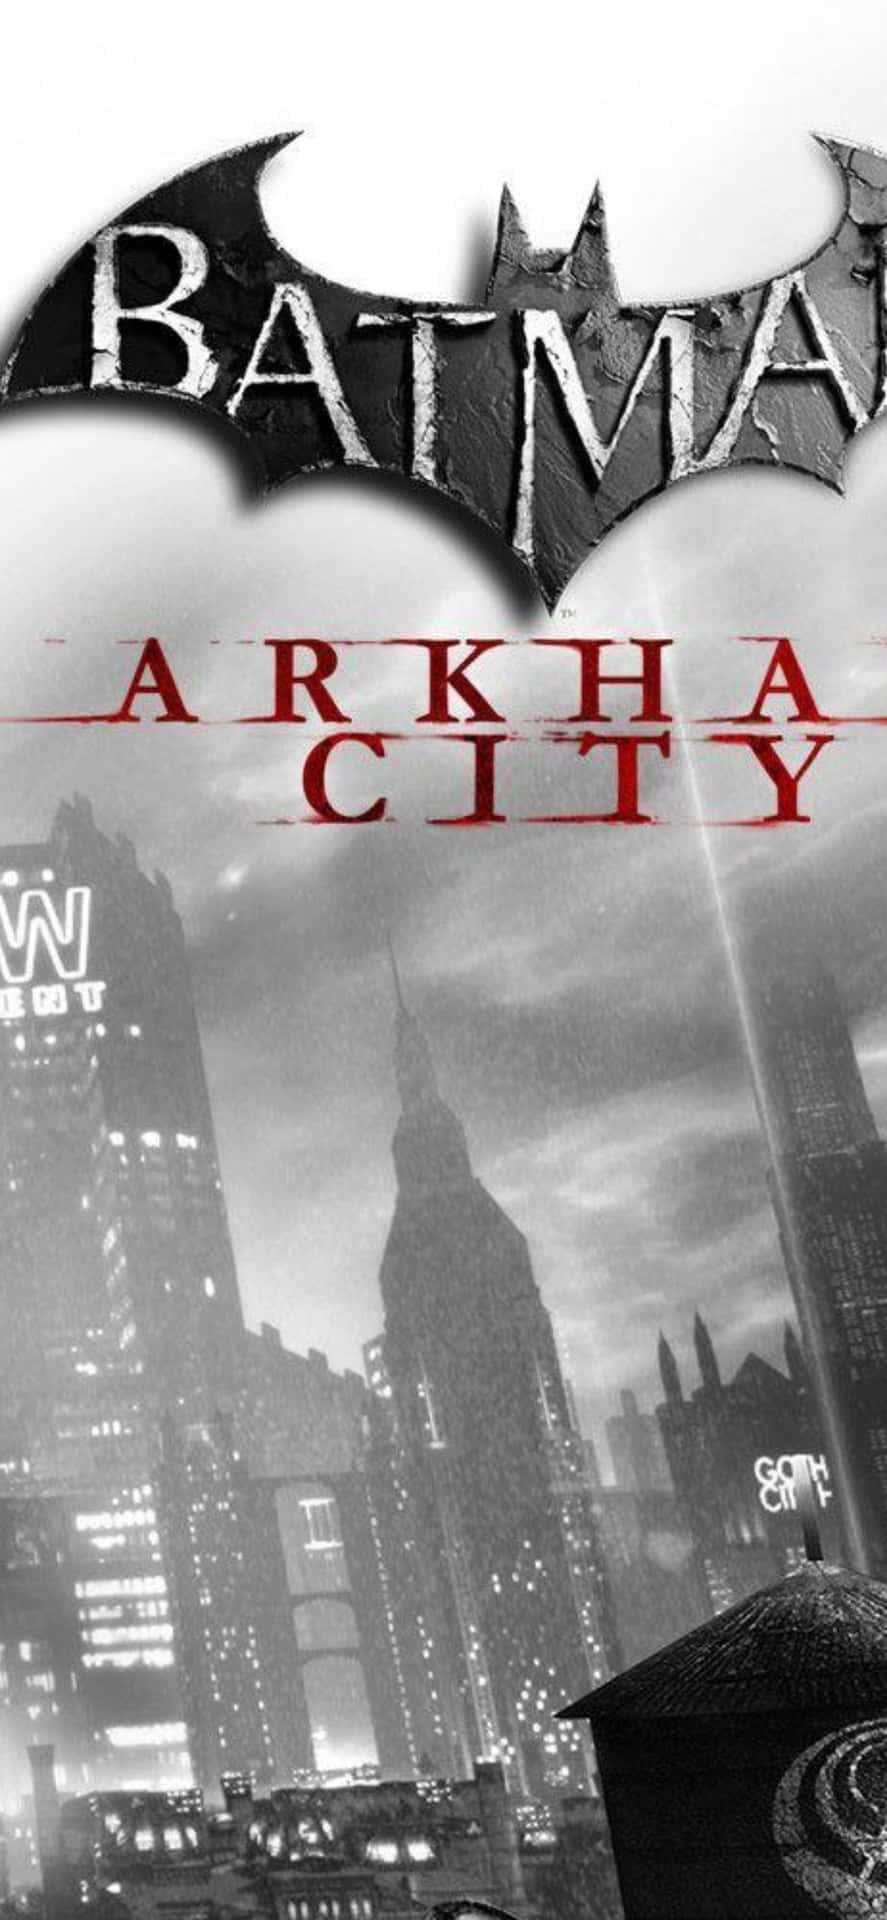 Become the Batman with the Iphone Xs Max and Arkham City